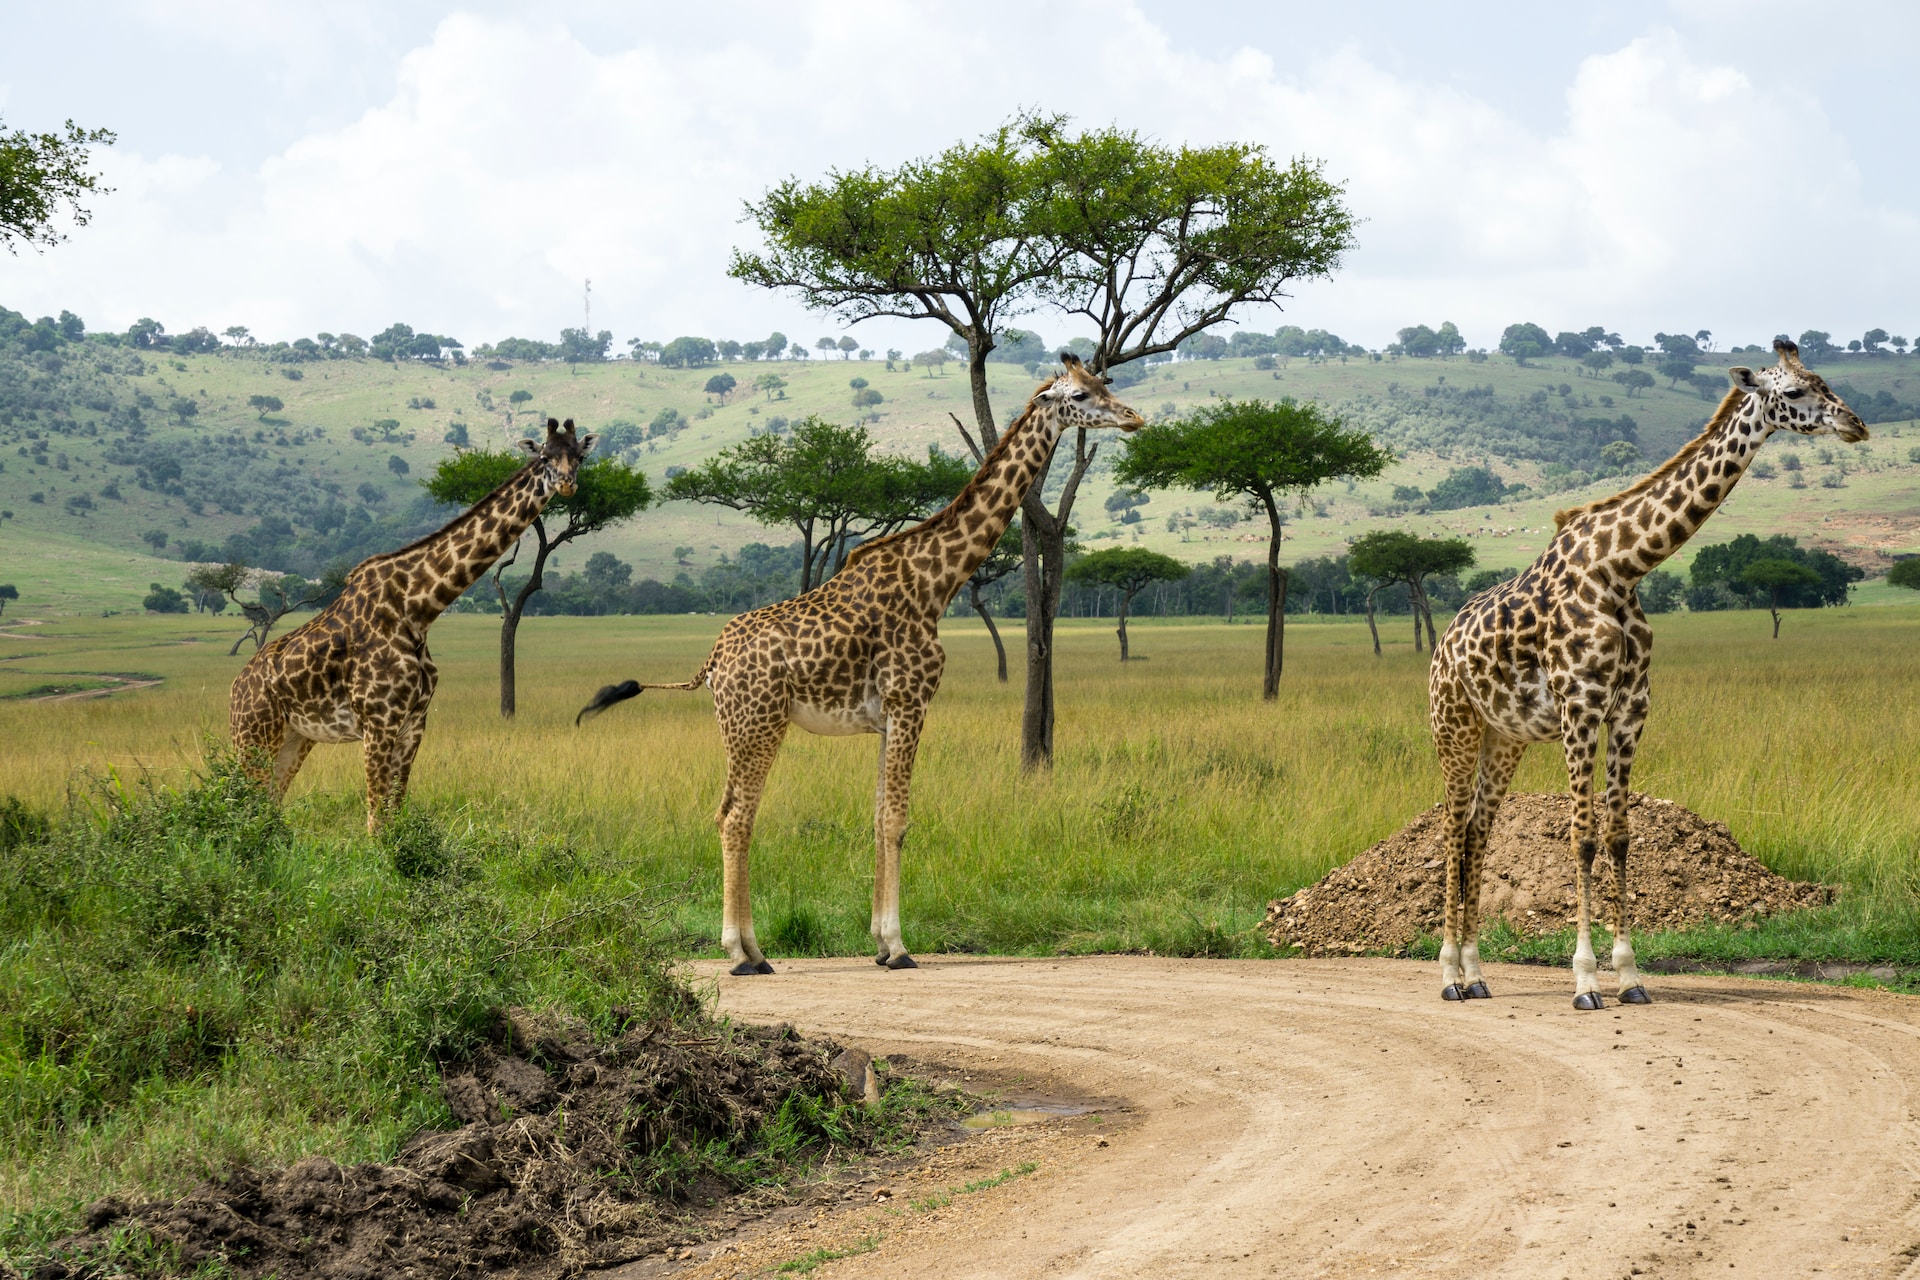 Kenya vs Tanzania safari, Which place is the Best to visit this year?